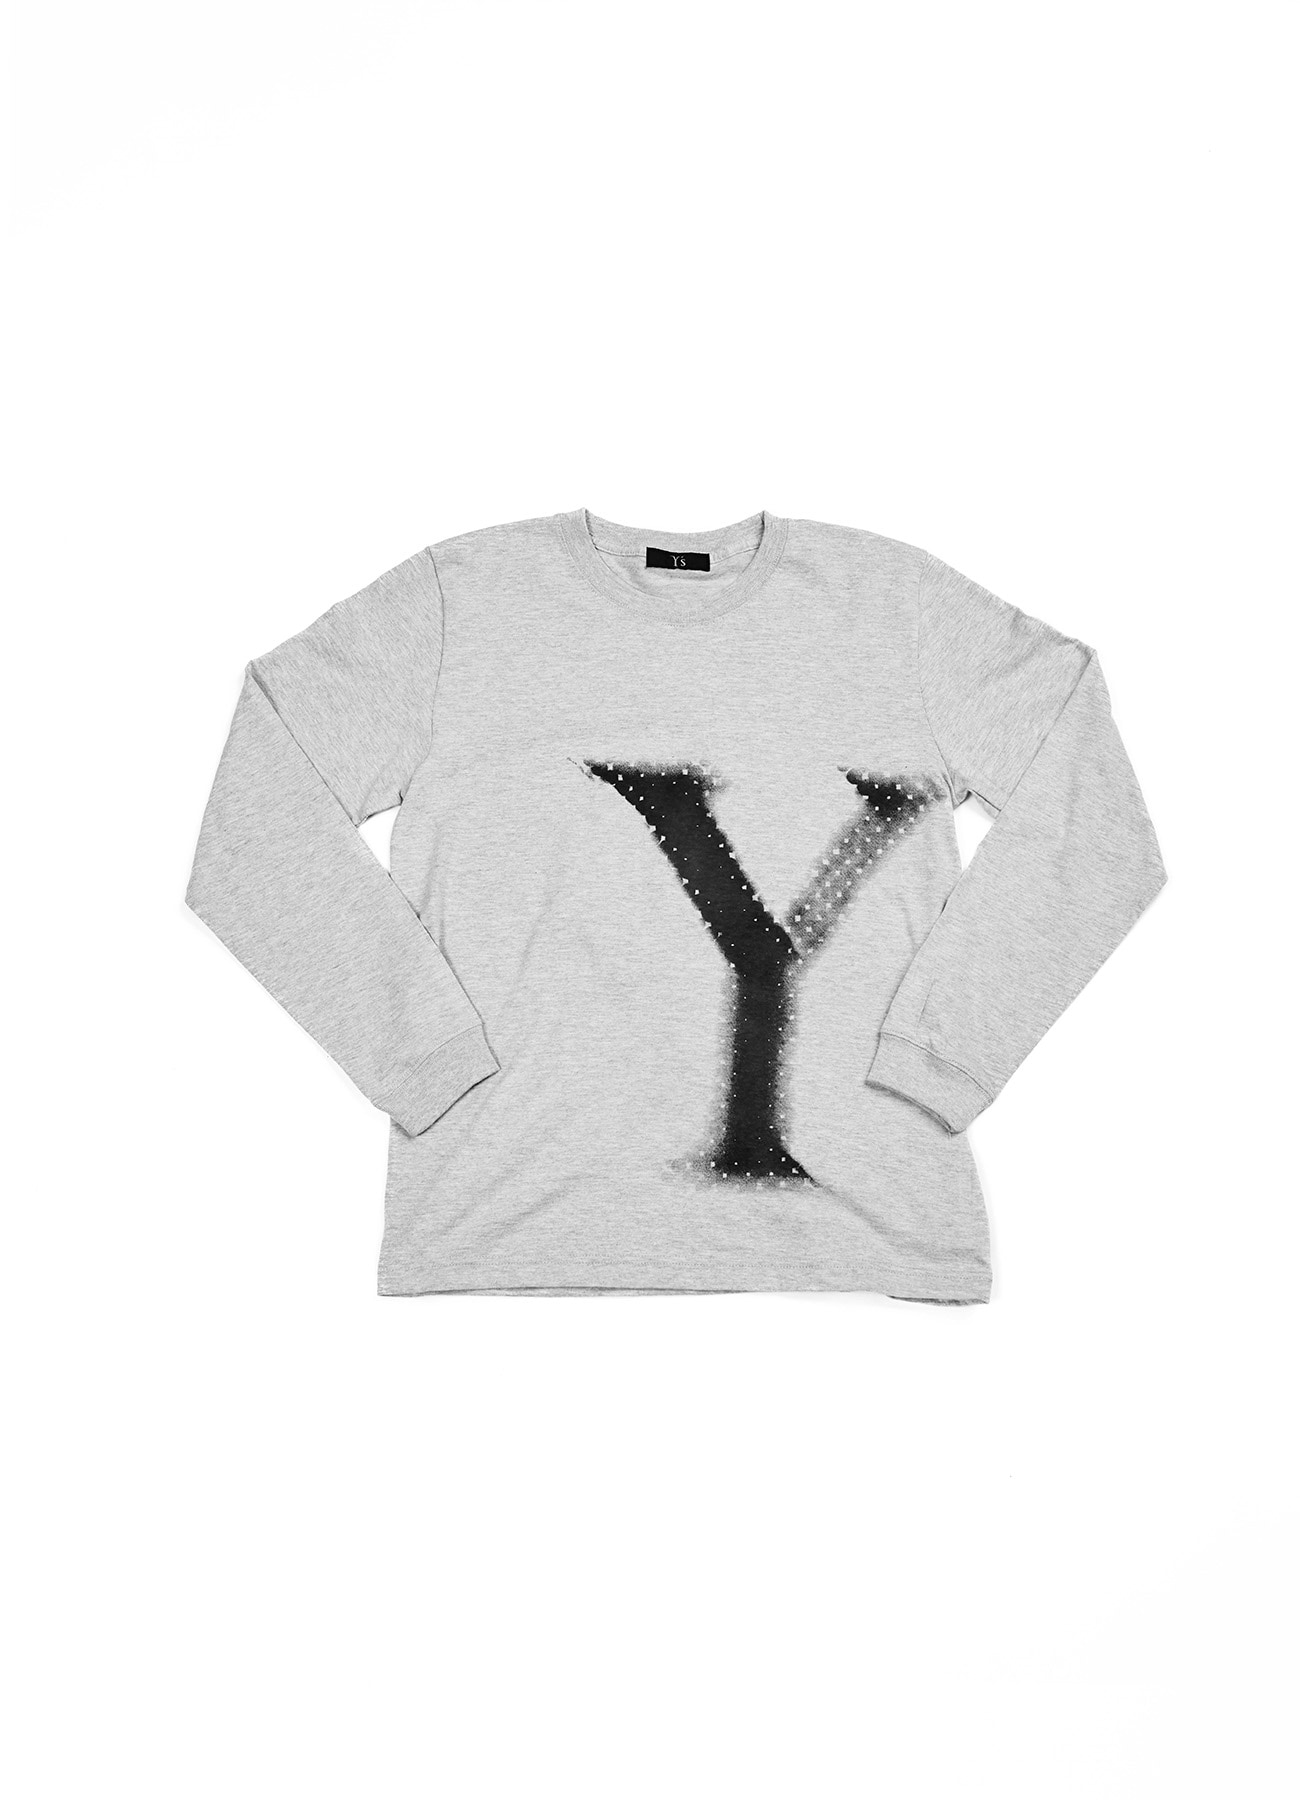 -Online EXCLUSIVE- Y's Big logo Long sleeve T-shirts(S Grey): Y's｜THE